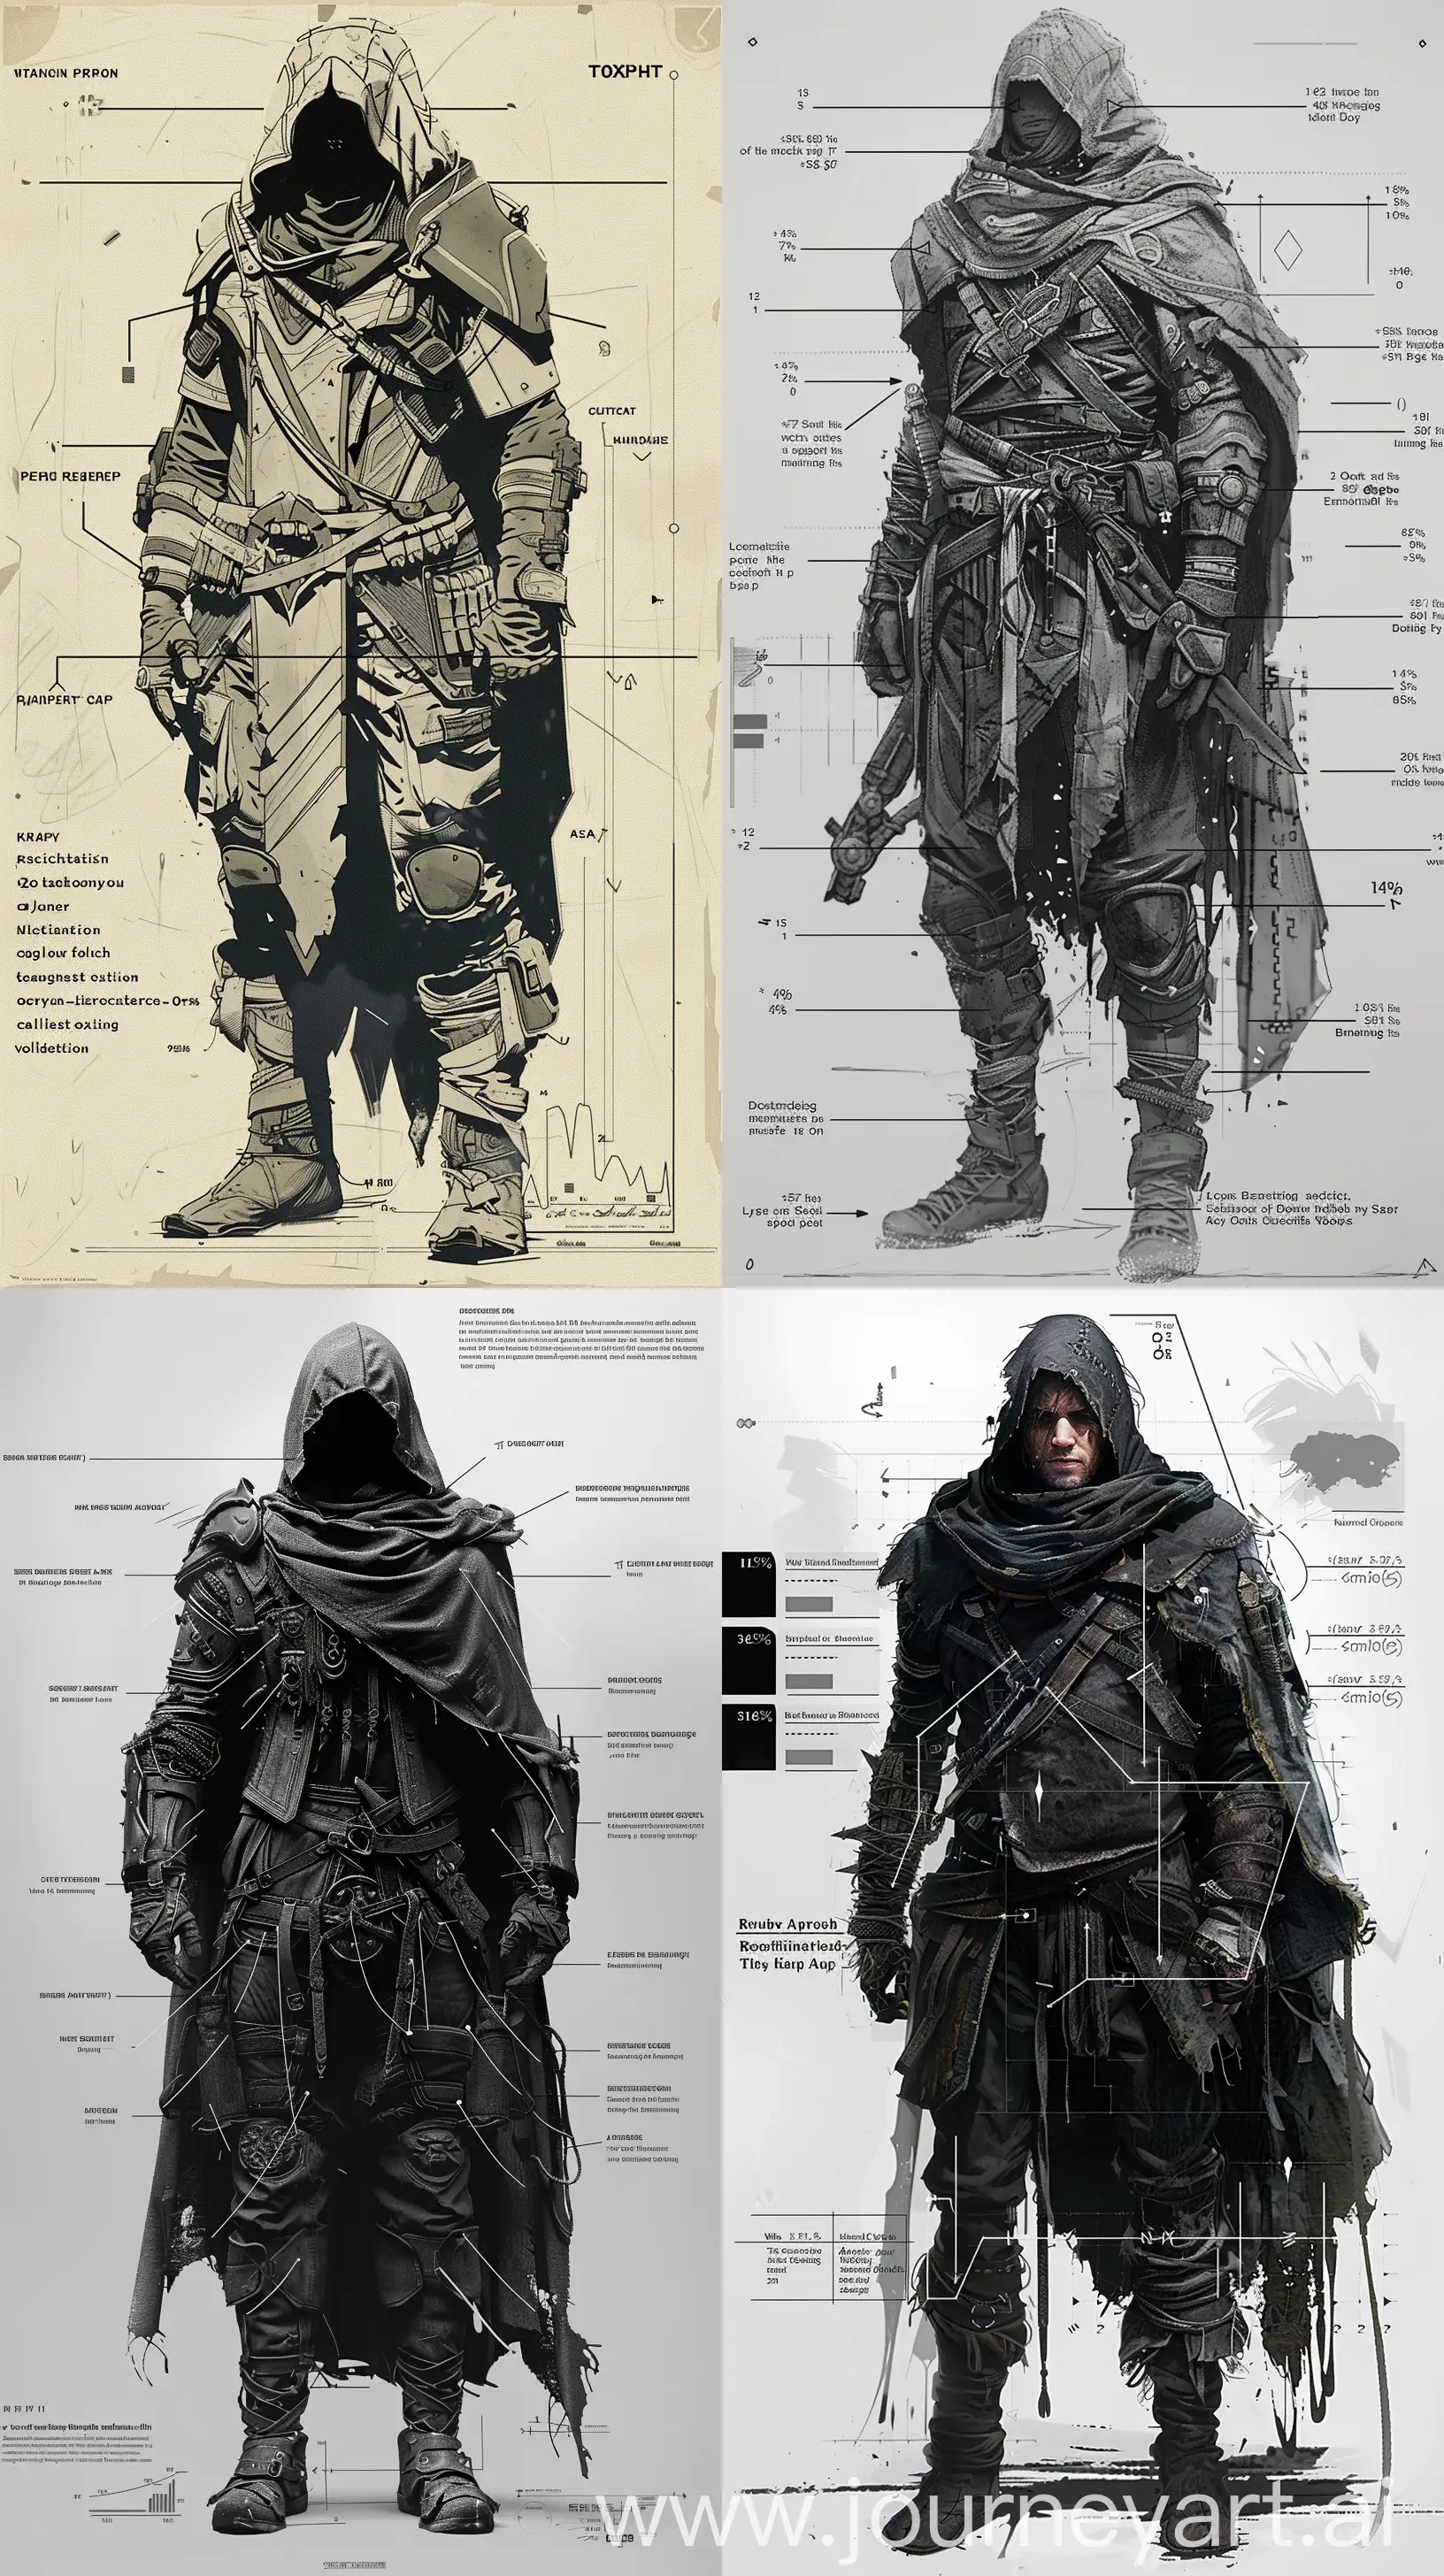 magazine, statistics, lines pointing to clothing and gear, detailed character from a dark, high epic fantasy, lots of details, graphs --ar 9:16